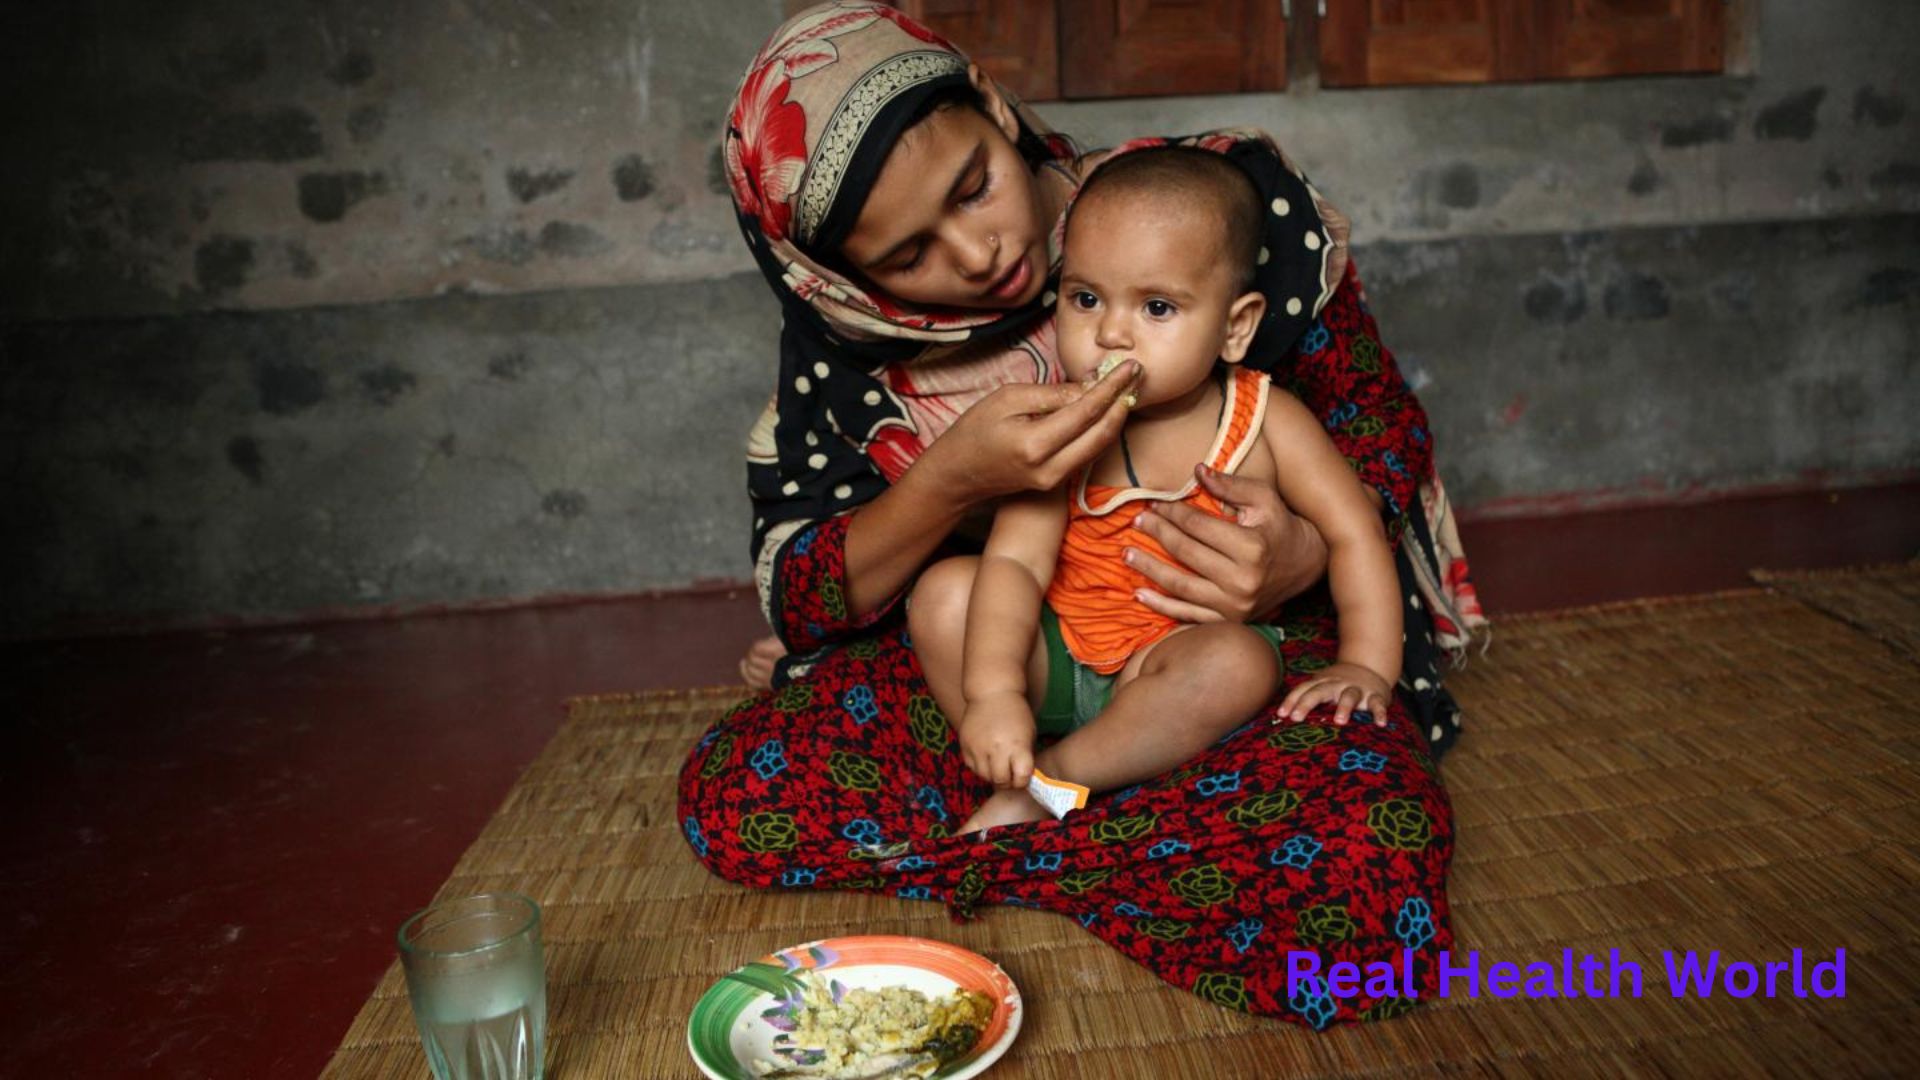 Children need to be fed quality food for a prosperous future